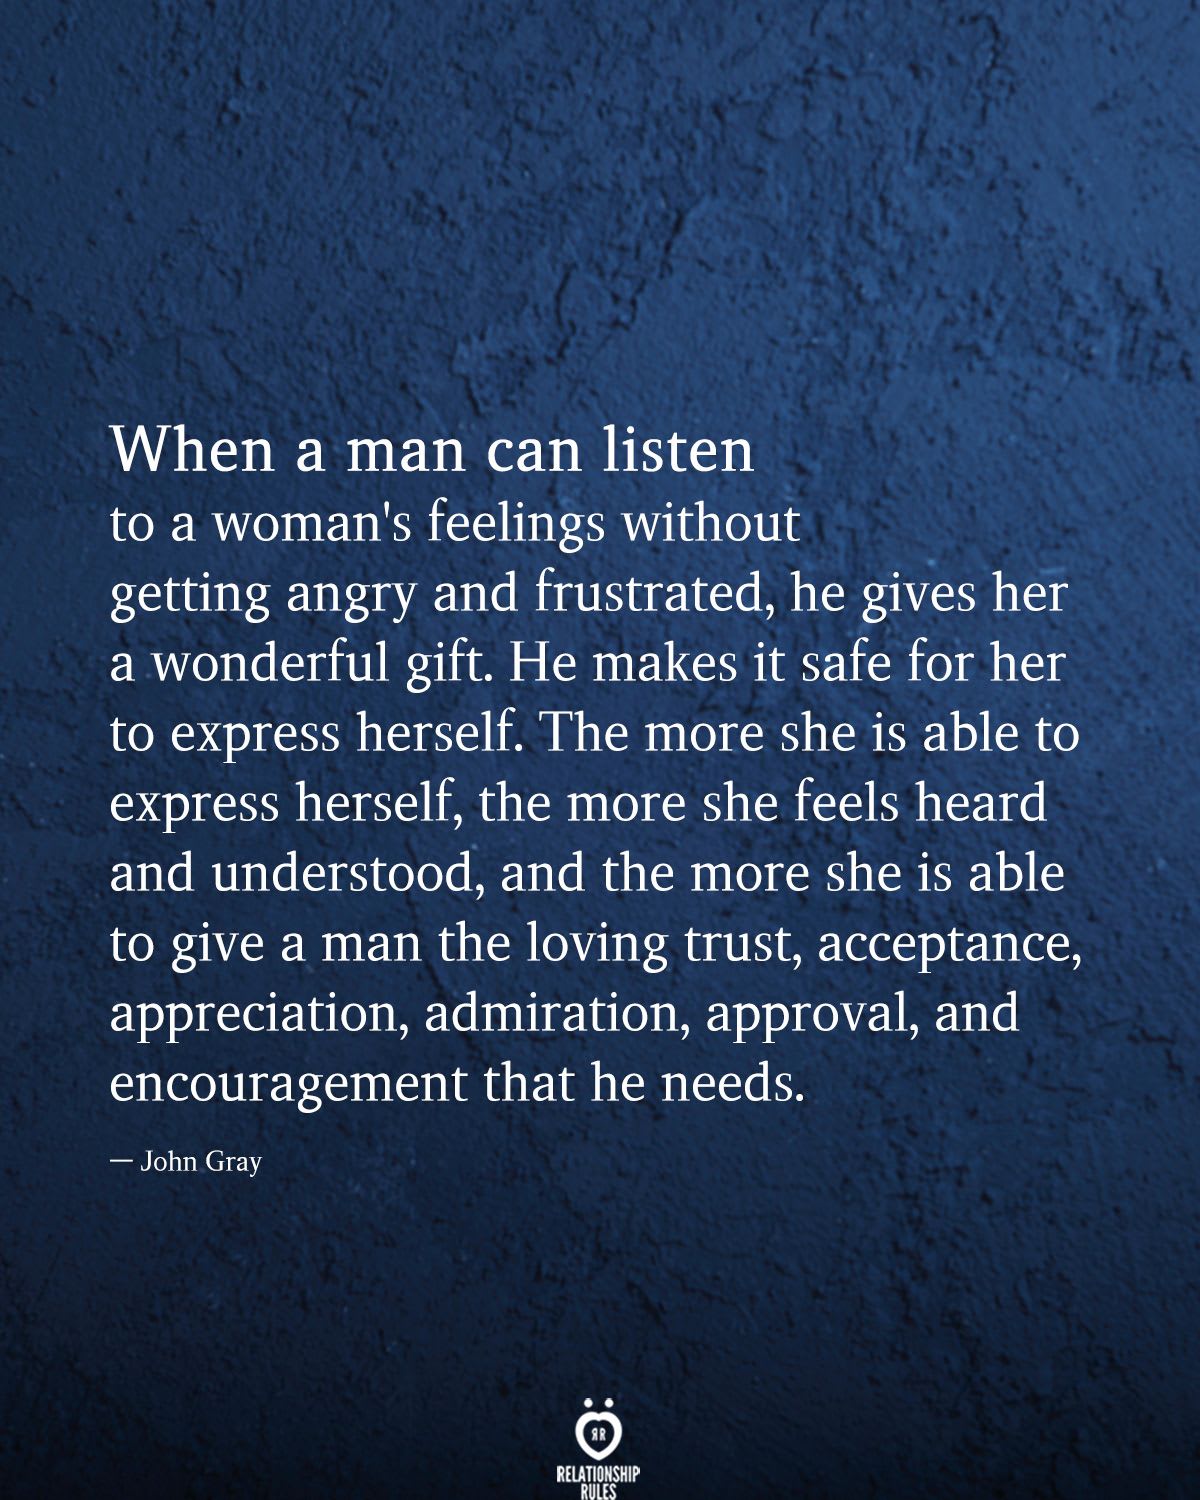 When A Man Can Listen To A Woman's Feelings Without Getting Angry And Frustrated